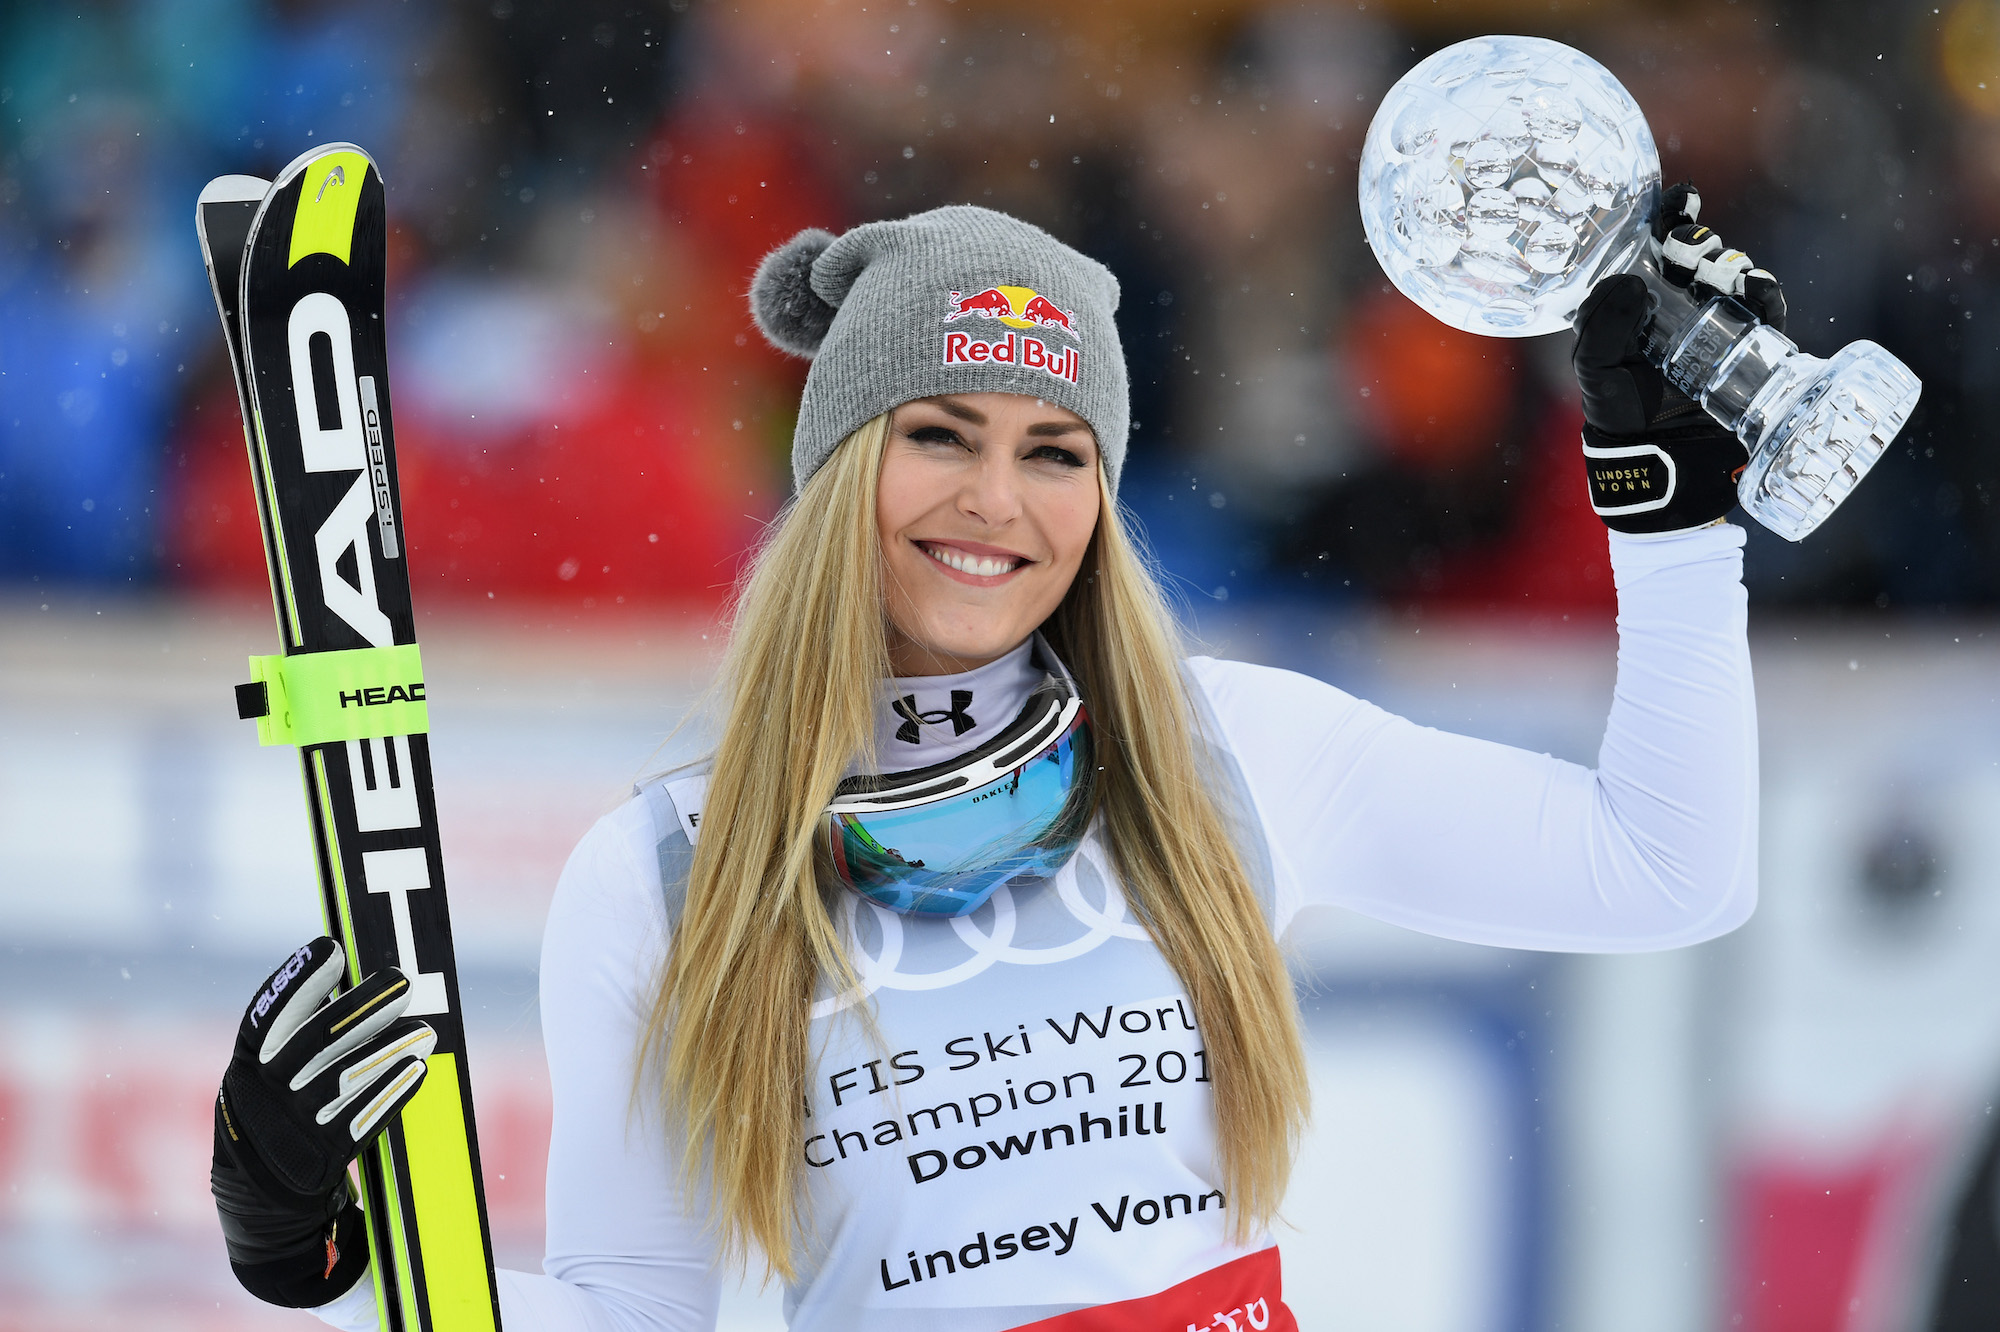 Who Has a Higher Net Worth: Lindsey Vonn or P.K. Subban?